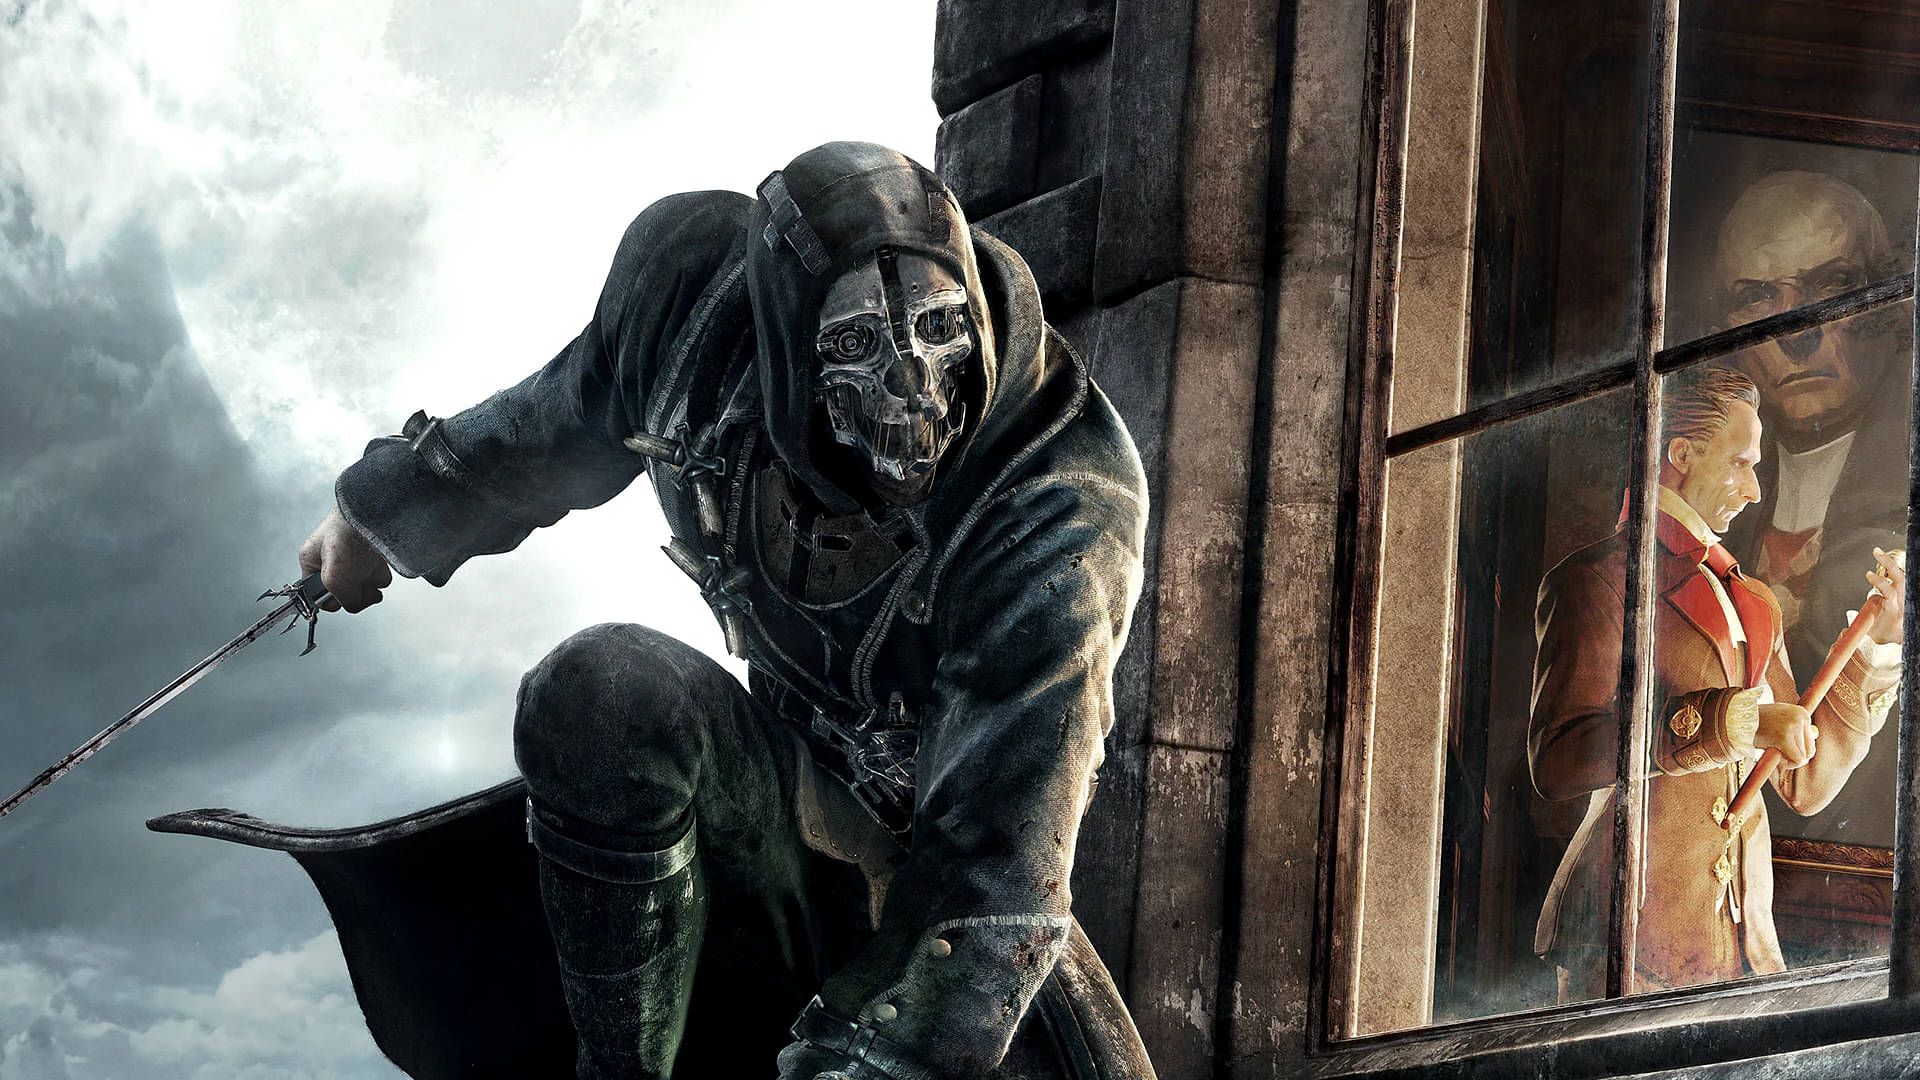 An image showing the protagonist of Dishonored, the game available on Steam